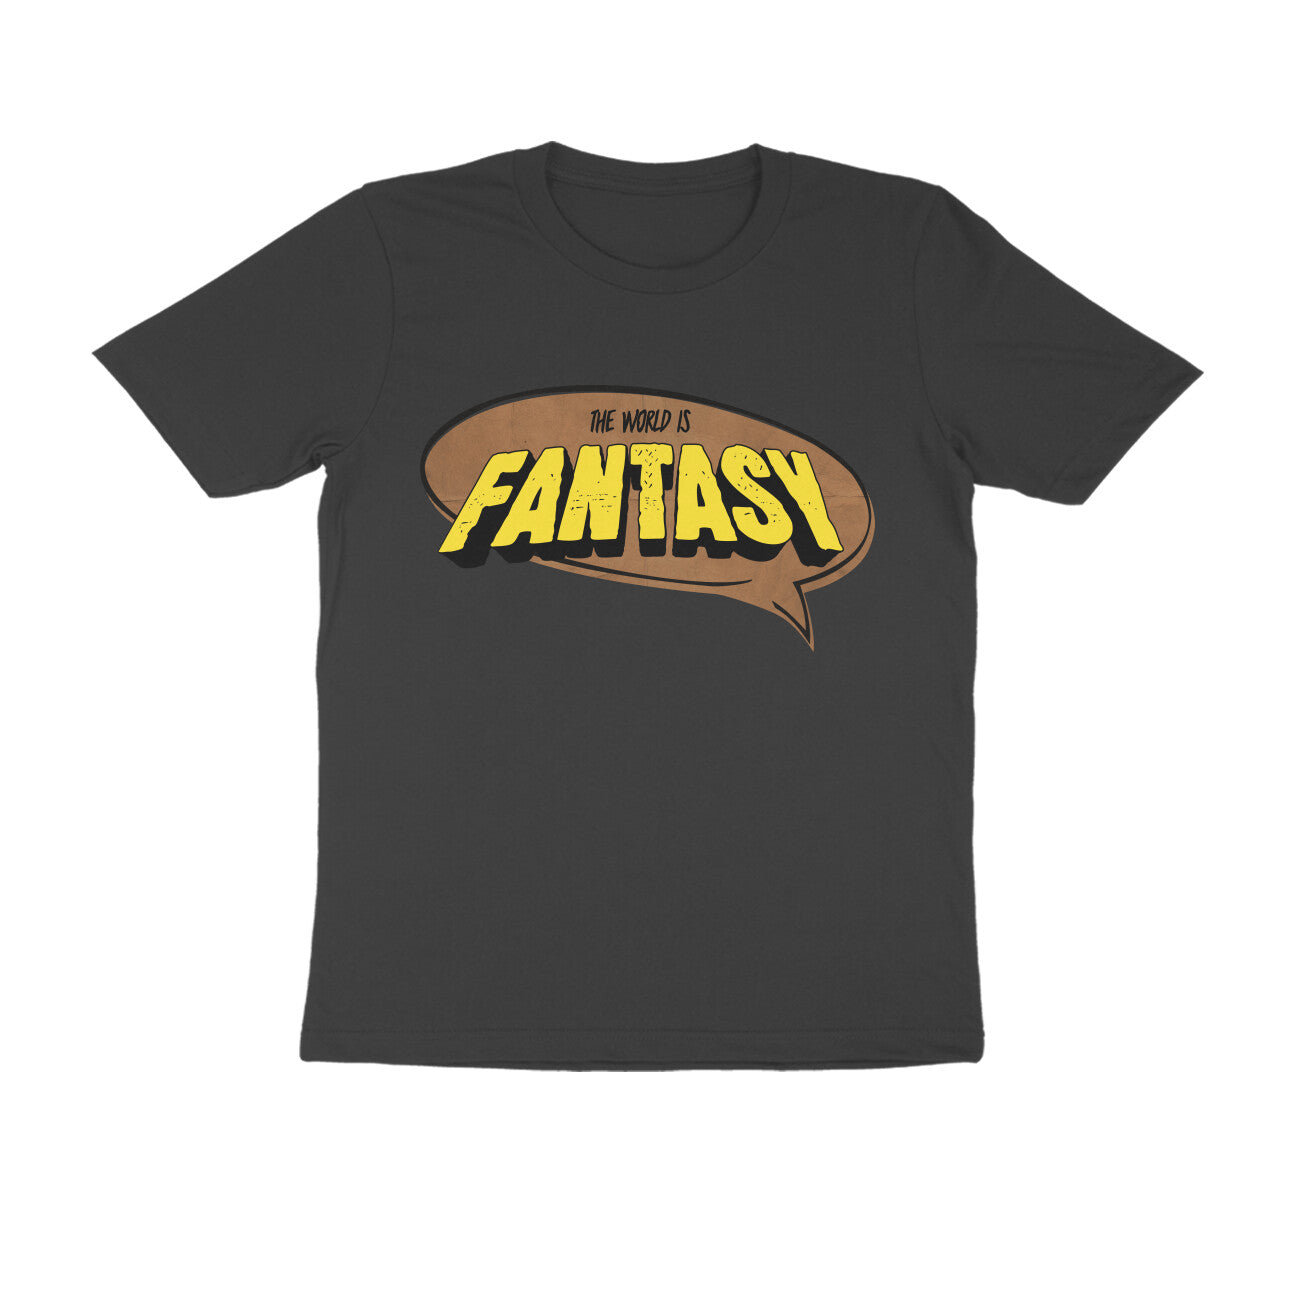 The World is Fantasy - Boring Men's T-shirt The Mean Indian Store